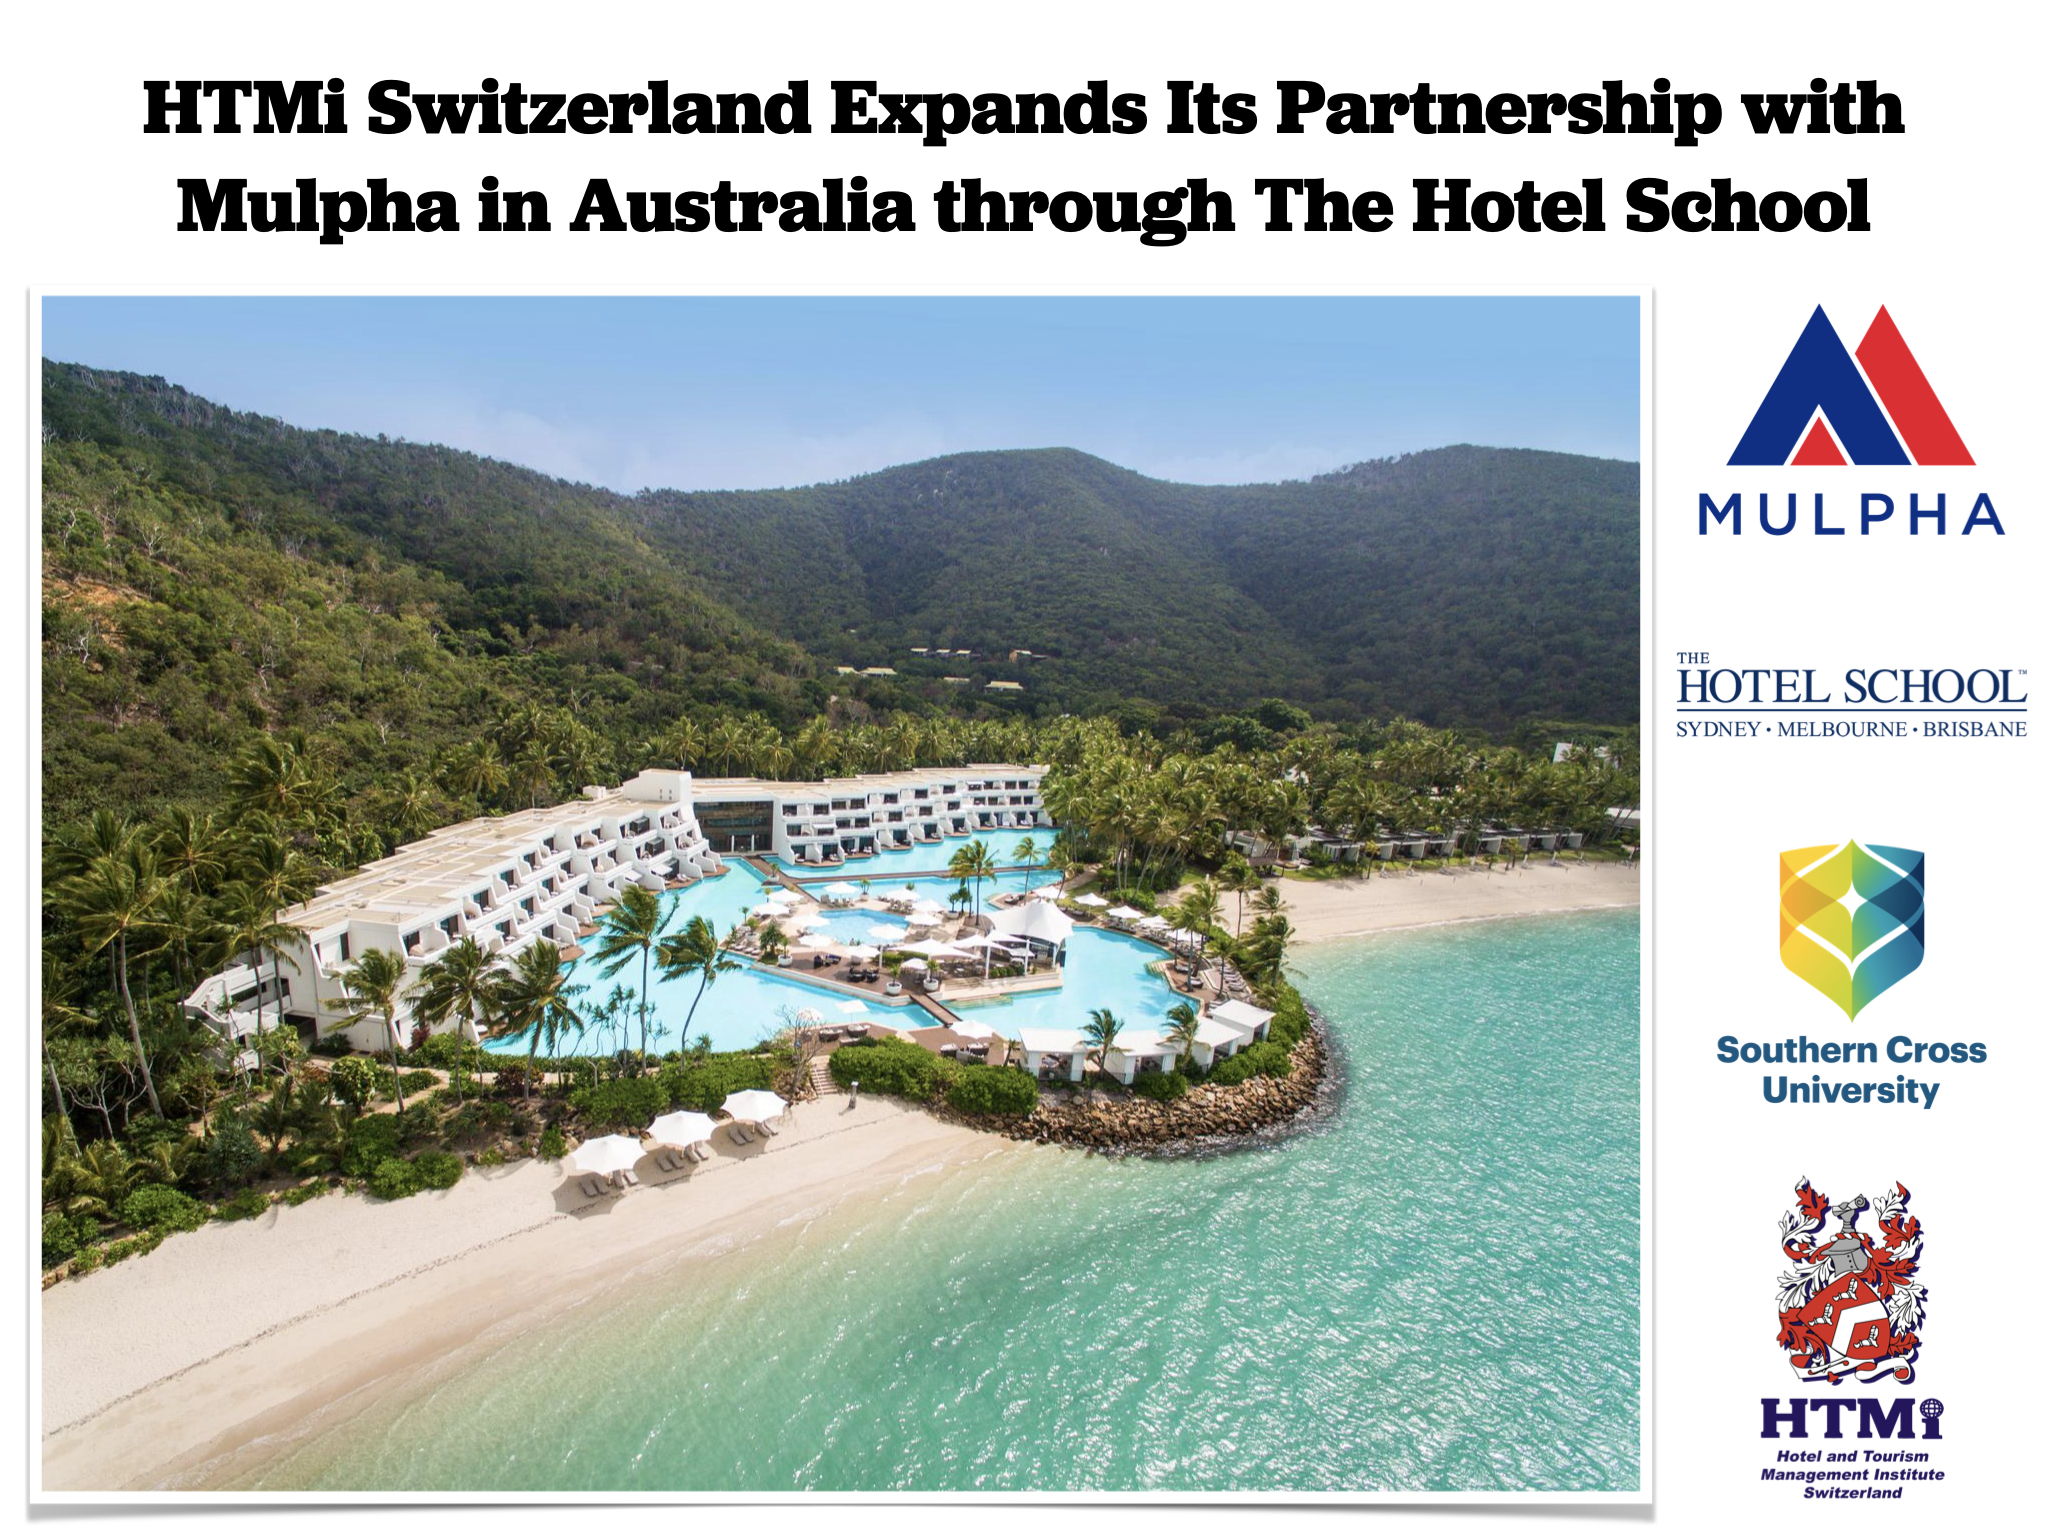 HTMi Switzerland Expands Its Partnership with Mulpha in Australia through The Hotel School